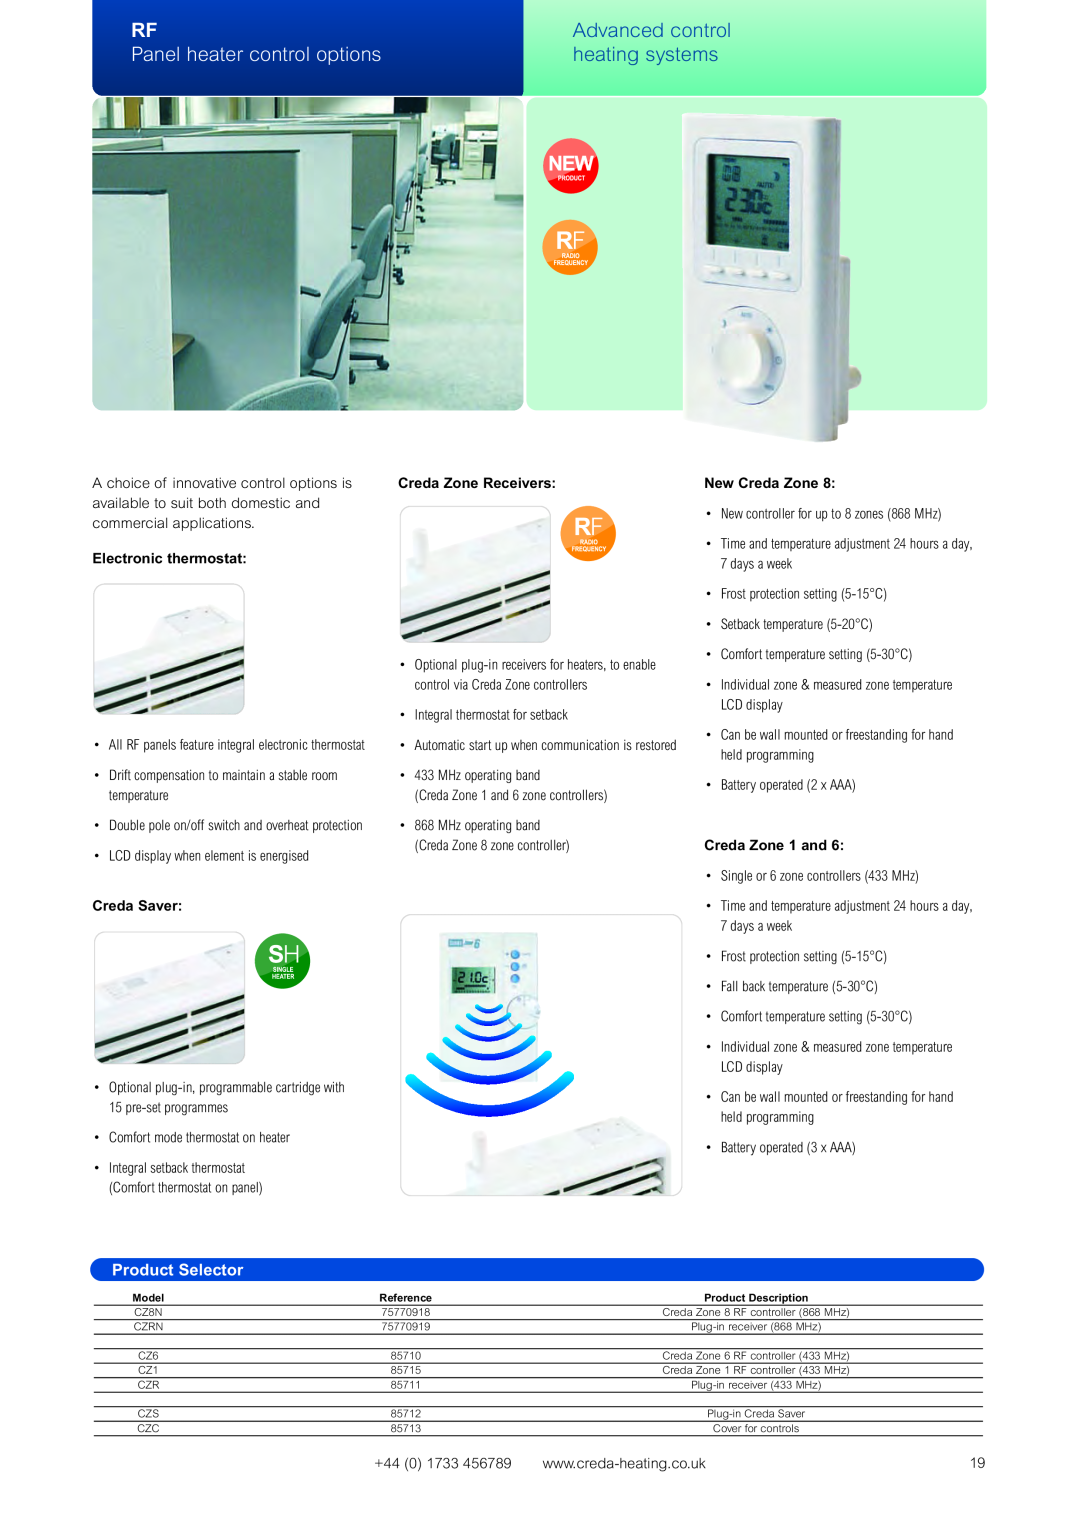 Creda Heating Solution manual Advanced control, Panel heater control options, heating systems, Product Selector 